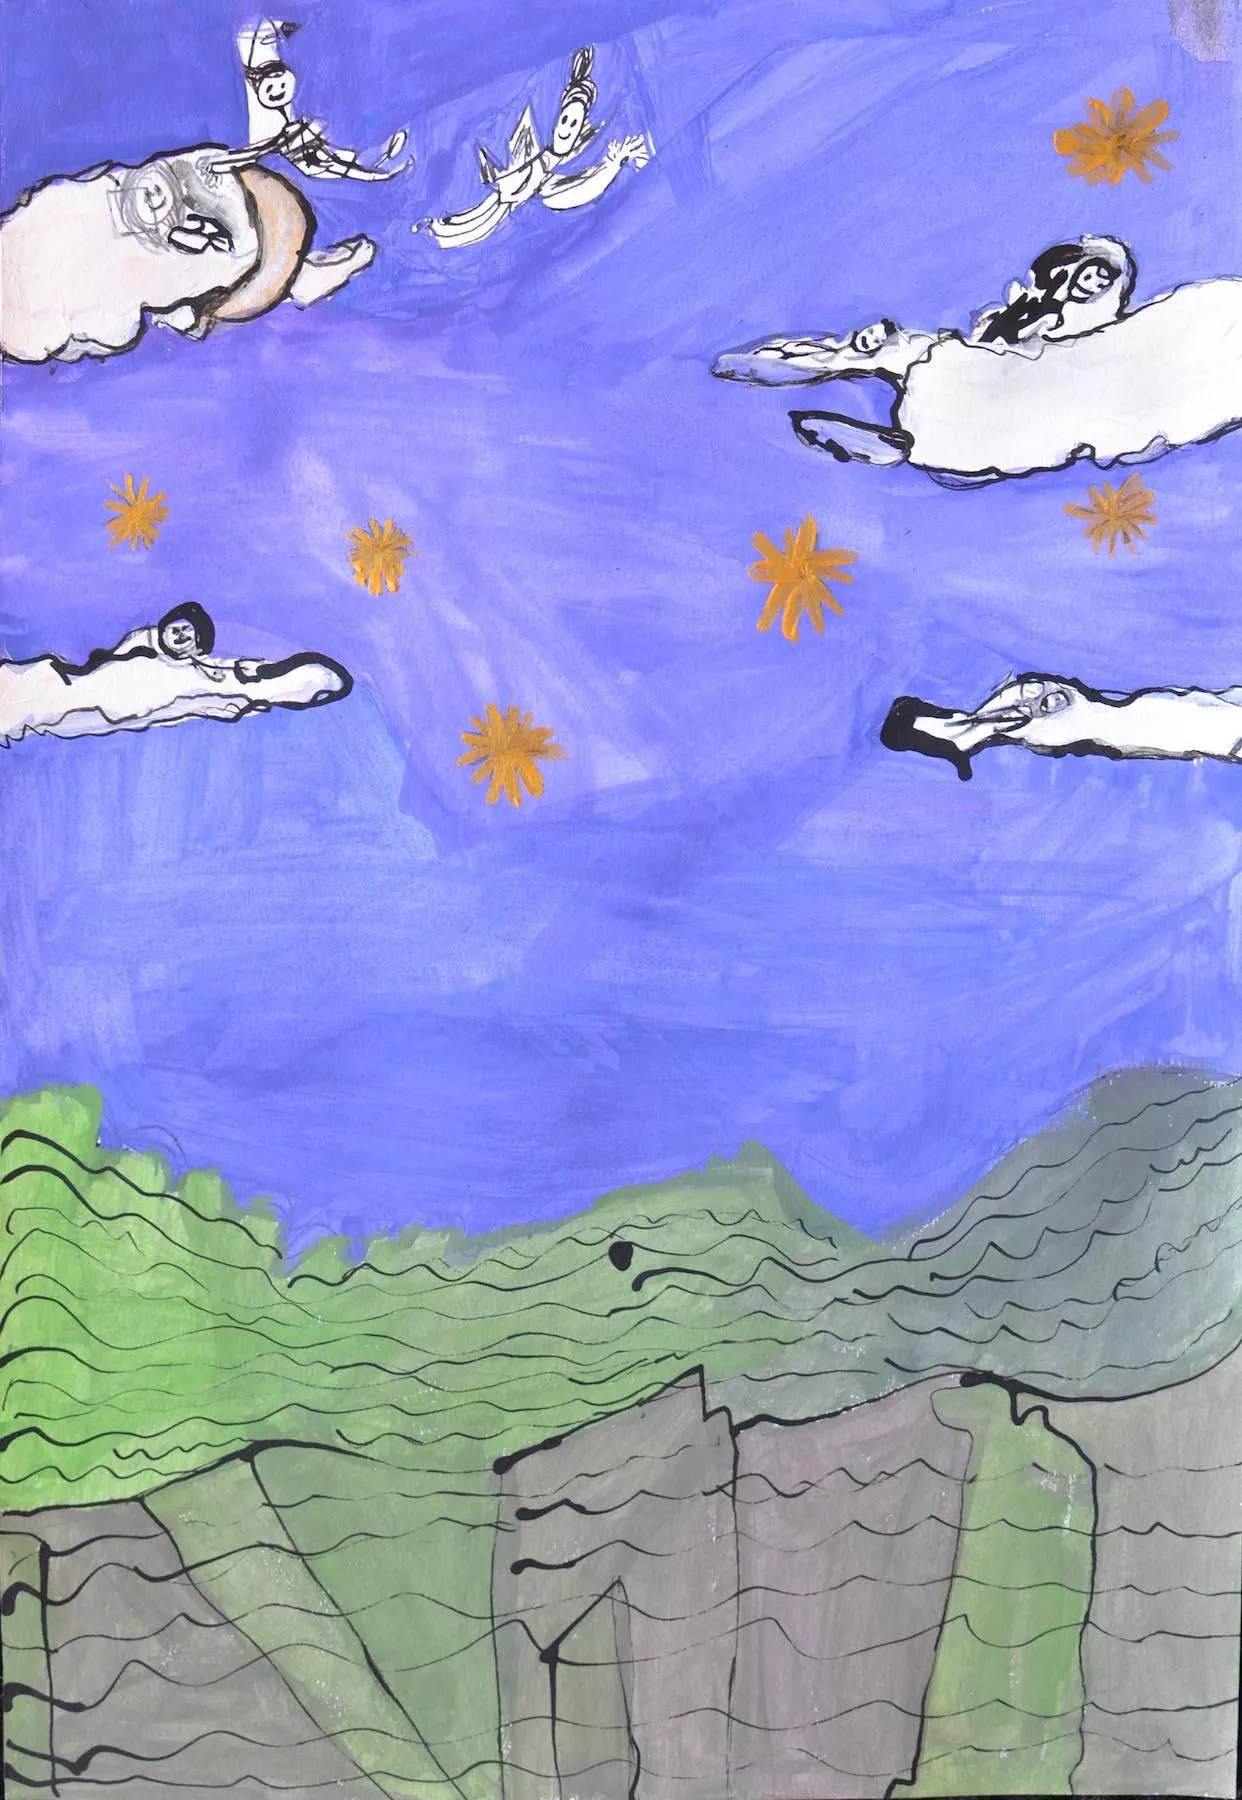 Within this vertical composition, a blue and violet sky with six golden stars, four white clouds and six angelic figures sits above green and gray mountainous terrain and a steep cliffside.